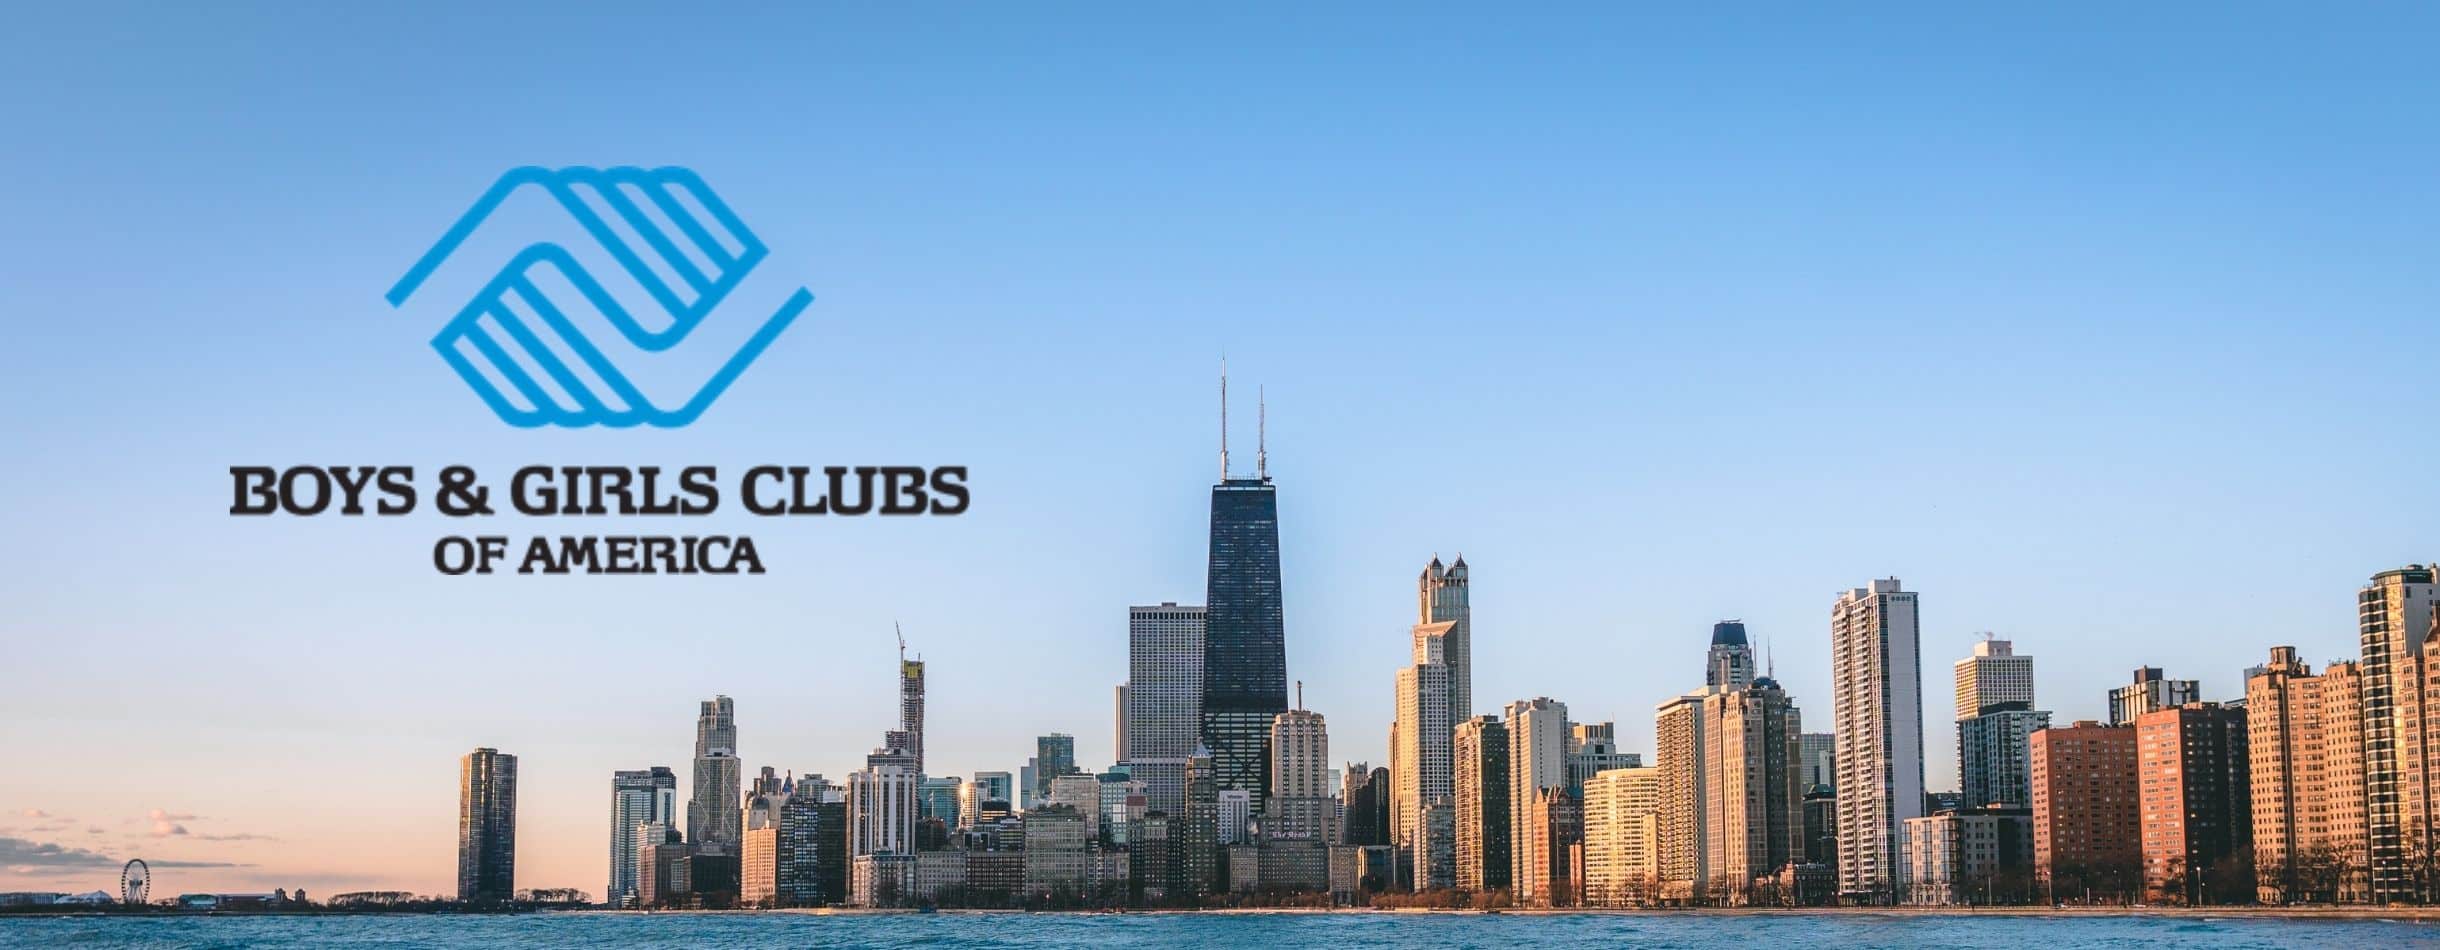 The Chicago skyline towers above Lake Michigan with the Boys & Girls Club of America logo displayed on top of the image in the left corner